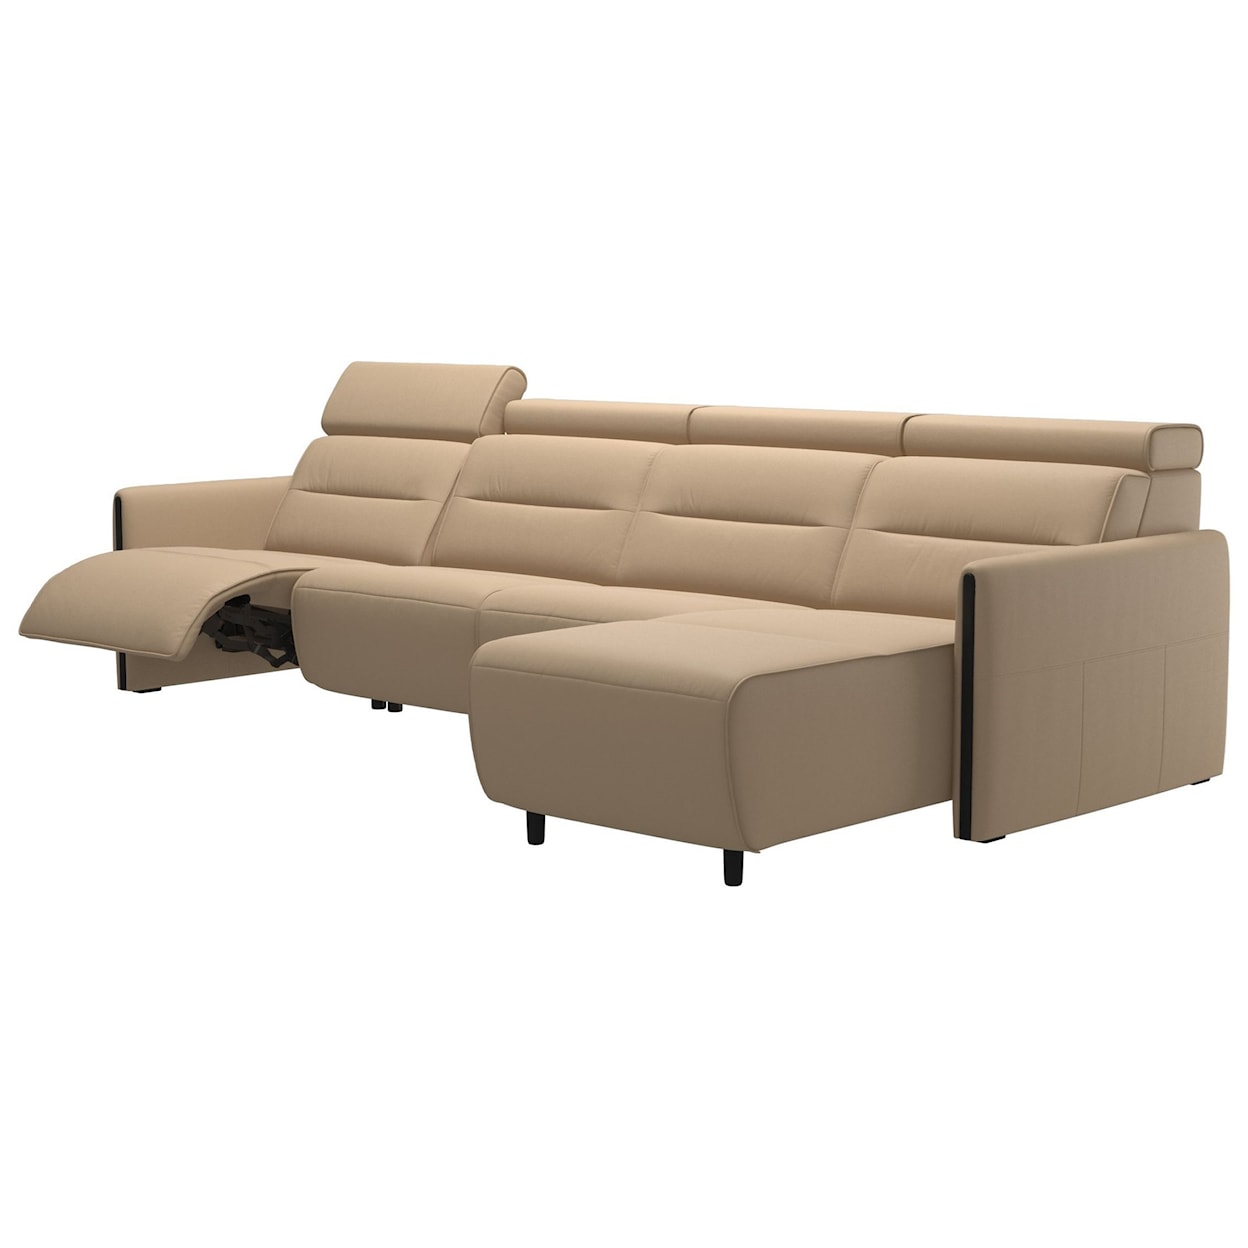 Stressless by Ekornes Emily Power 3-Seat Sectional with Longseat